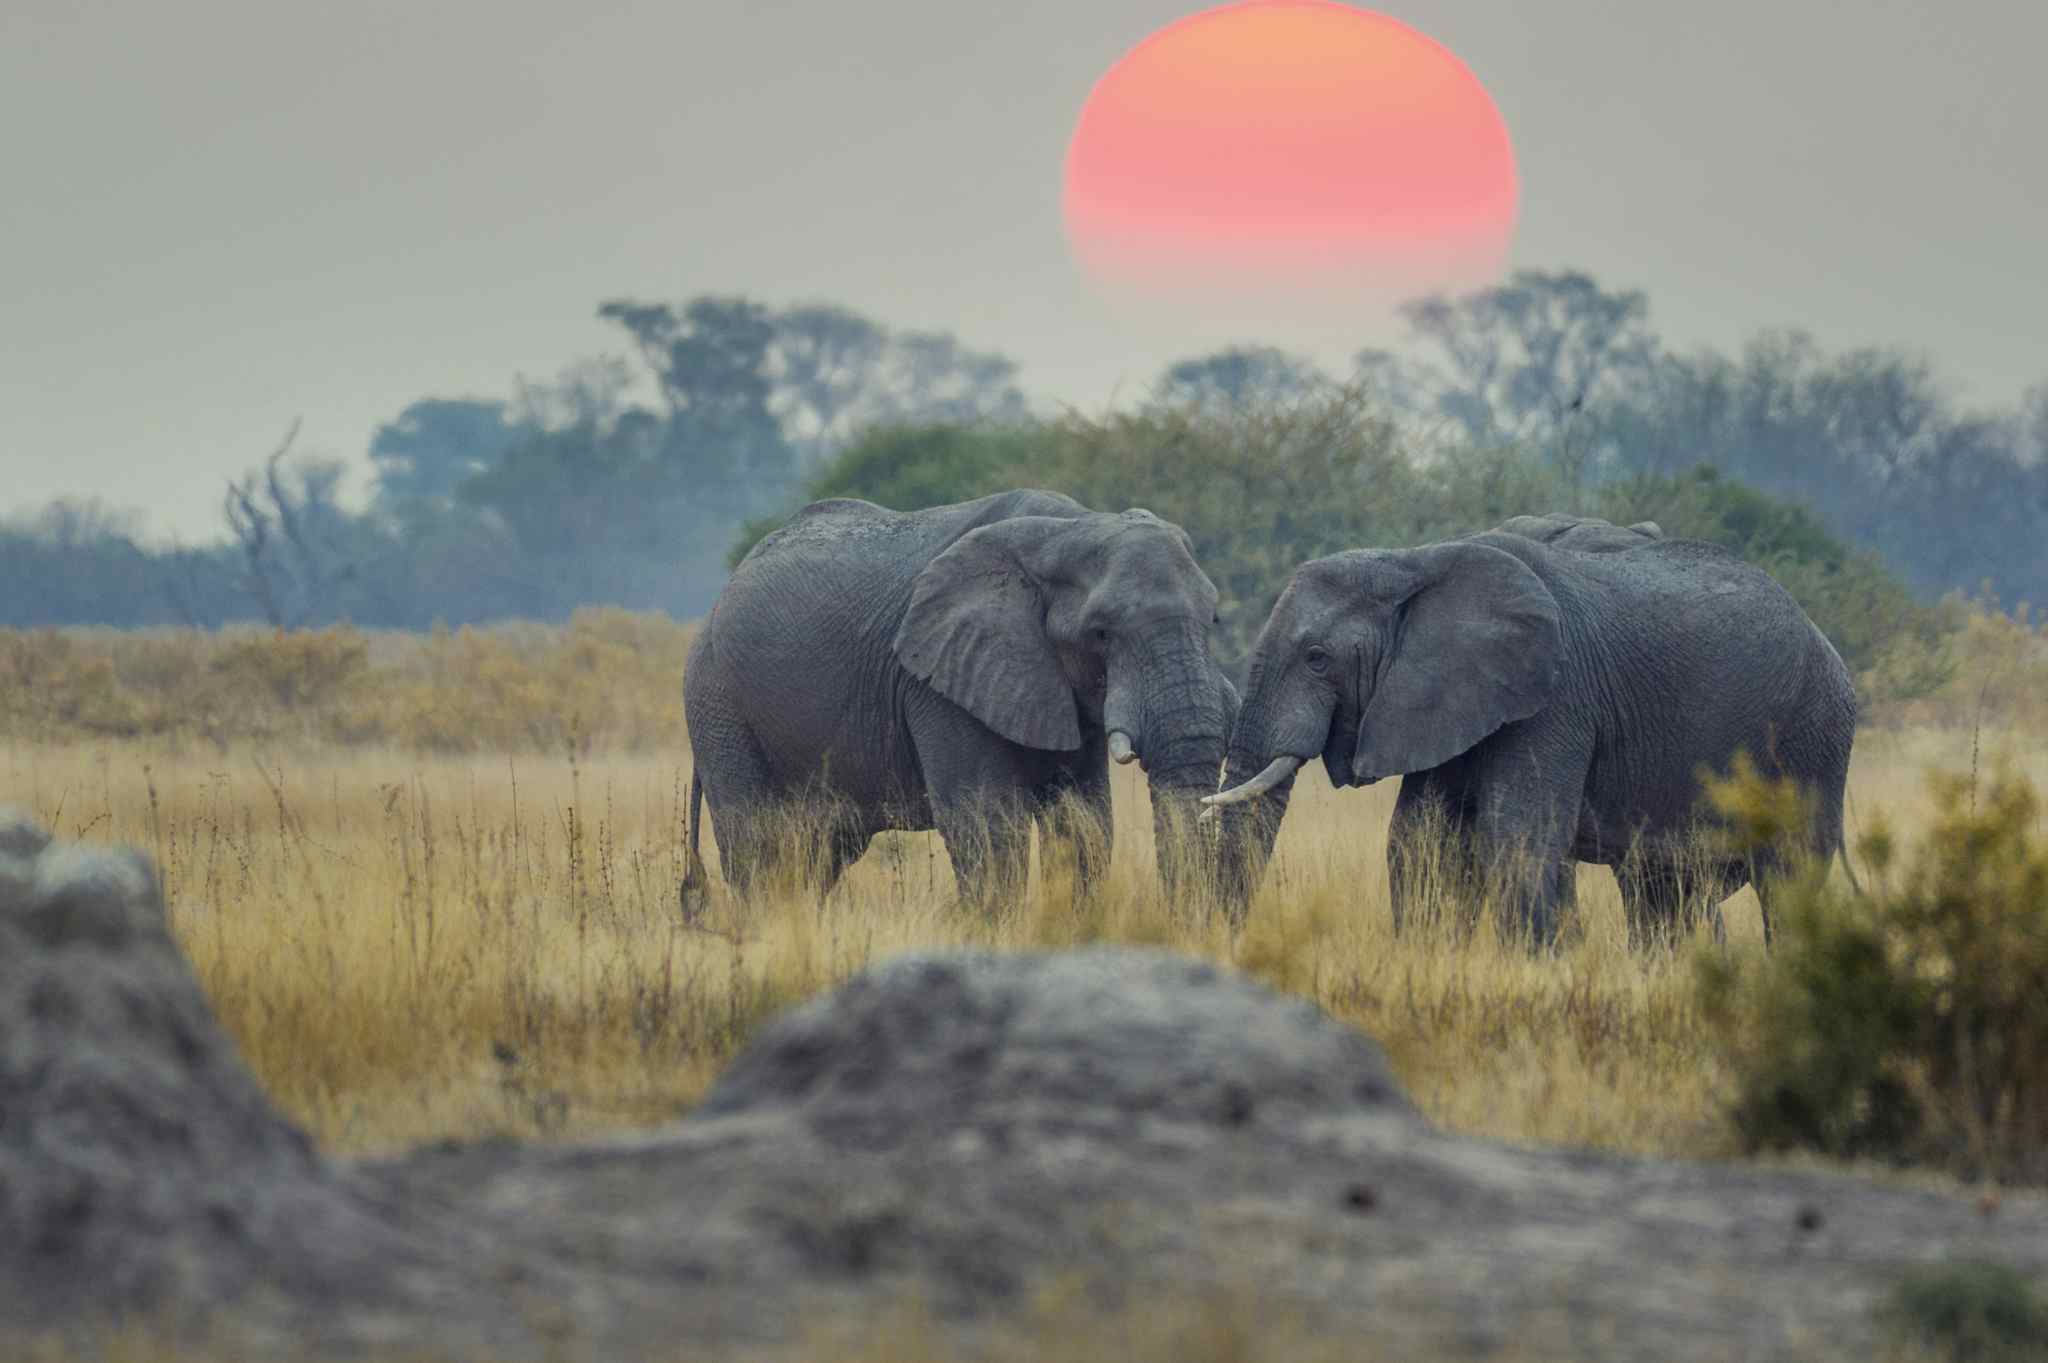 Elephants at sunset in Botswana. Photo: GettyImages-883340558